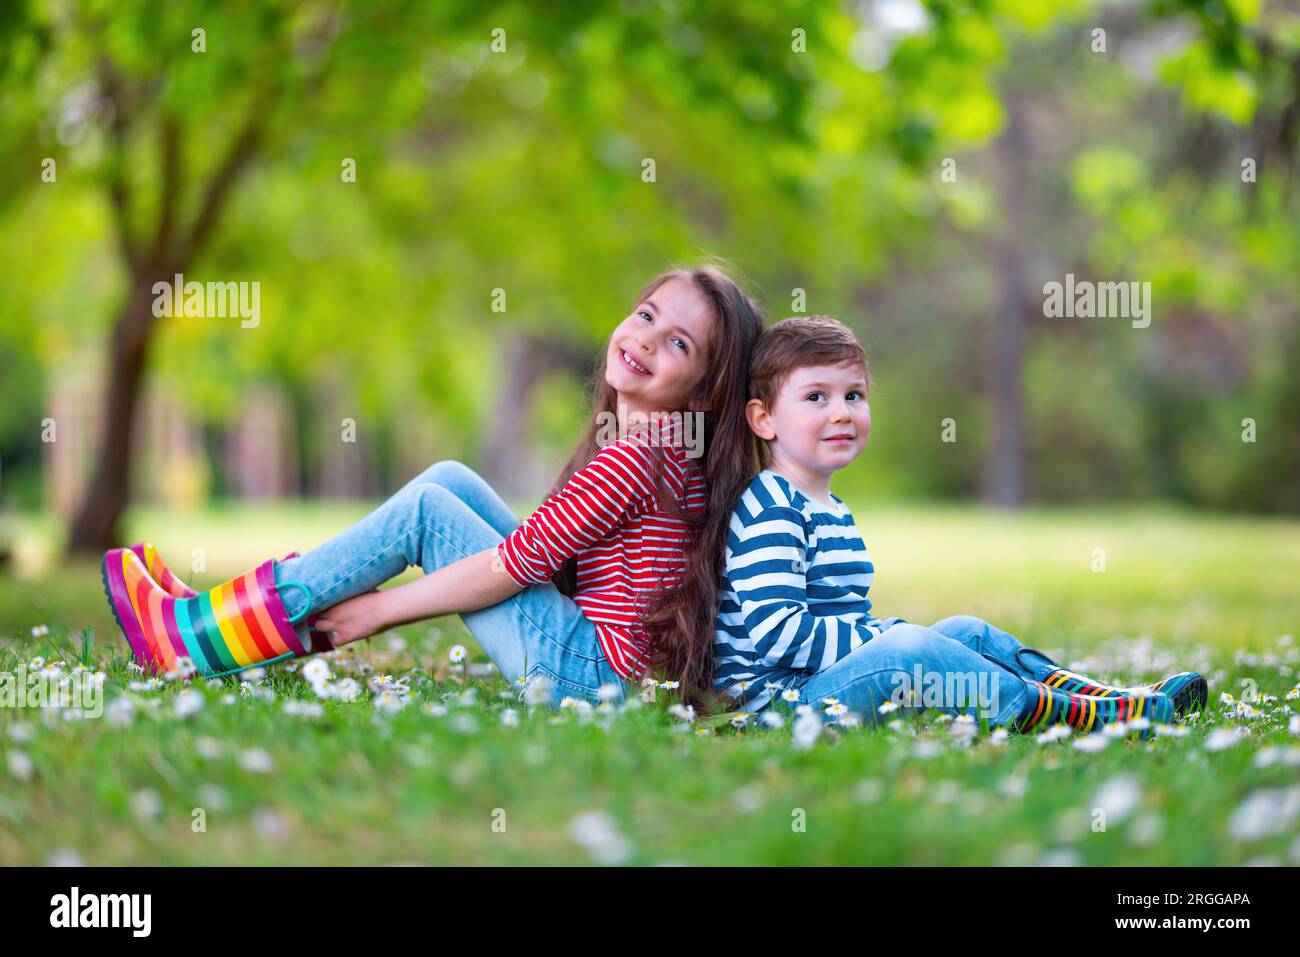 Happy kids boy and girl in rain rubber boots playing outside in the green park with blooming field of daisy flowers Stock Photo